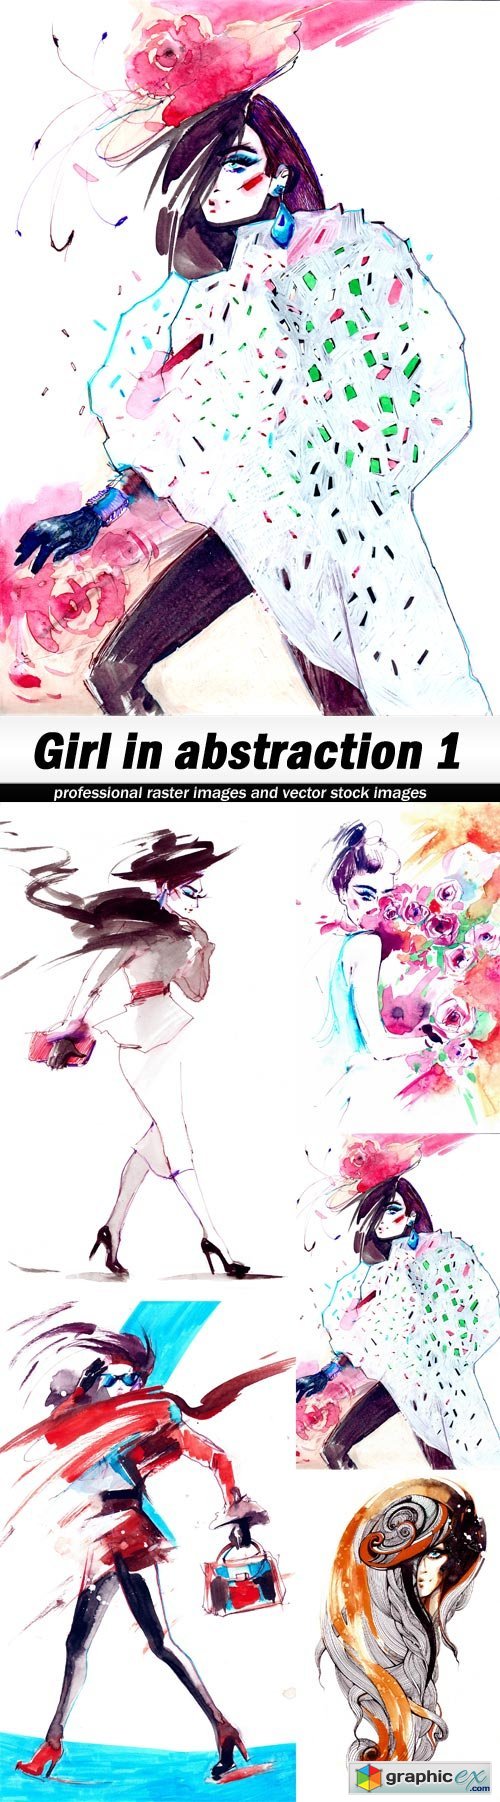 Girl in abstraction 1 - 5 UHQ JPEG